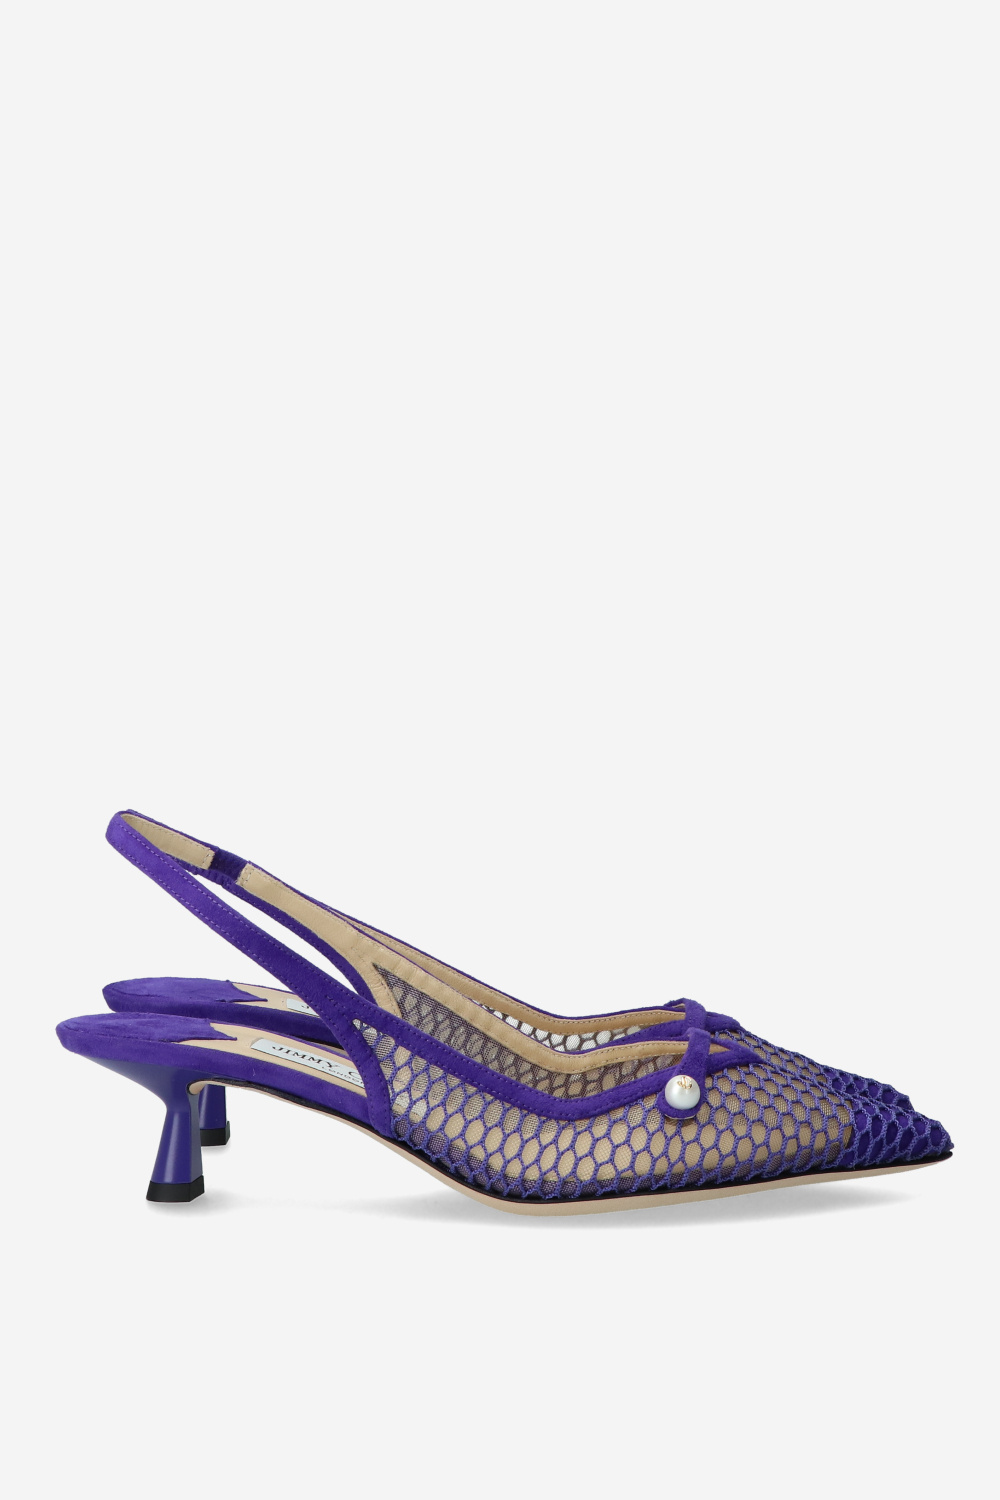 Jimmy Choo Purple Slingback Heels- Size 40 (See Notes) – The Saved  Collection